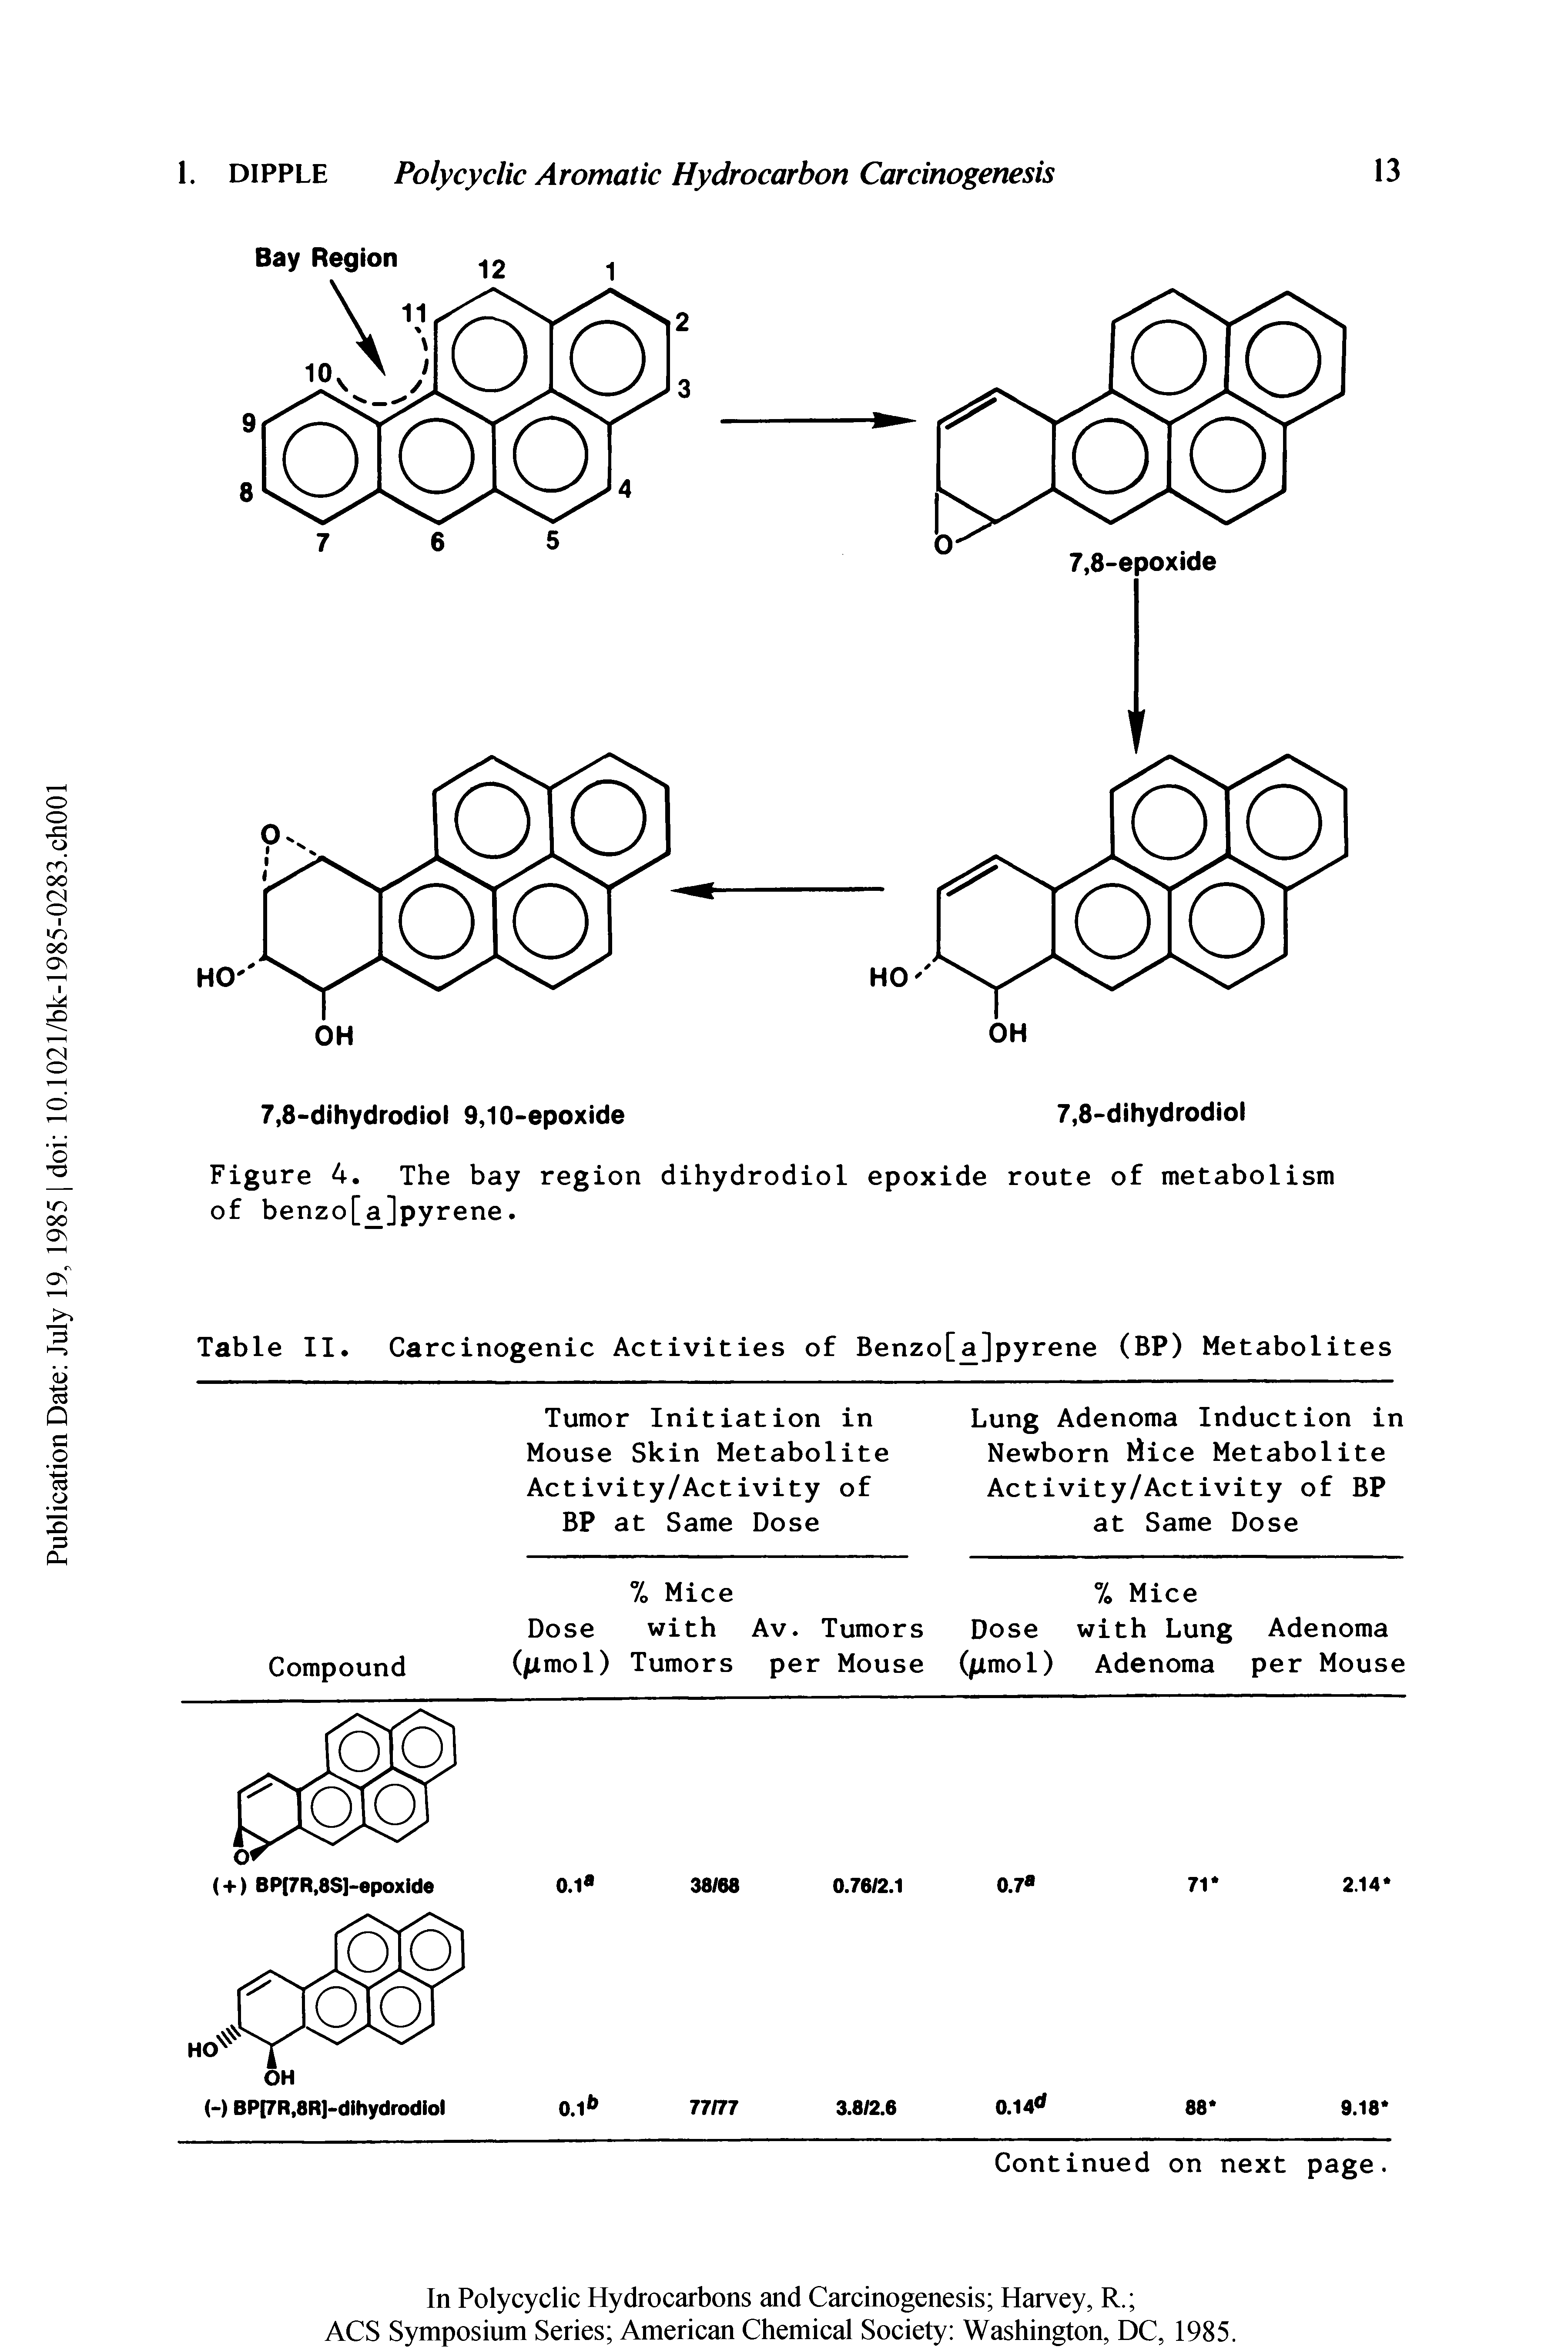 Figure 4. The bay region dihydrodiol epoxide route of metabolism of benzo[a]pyrene.